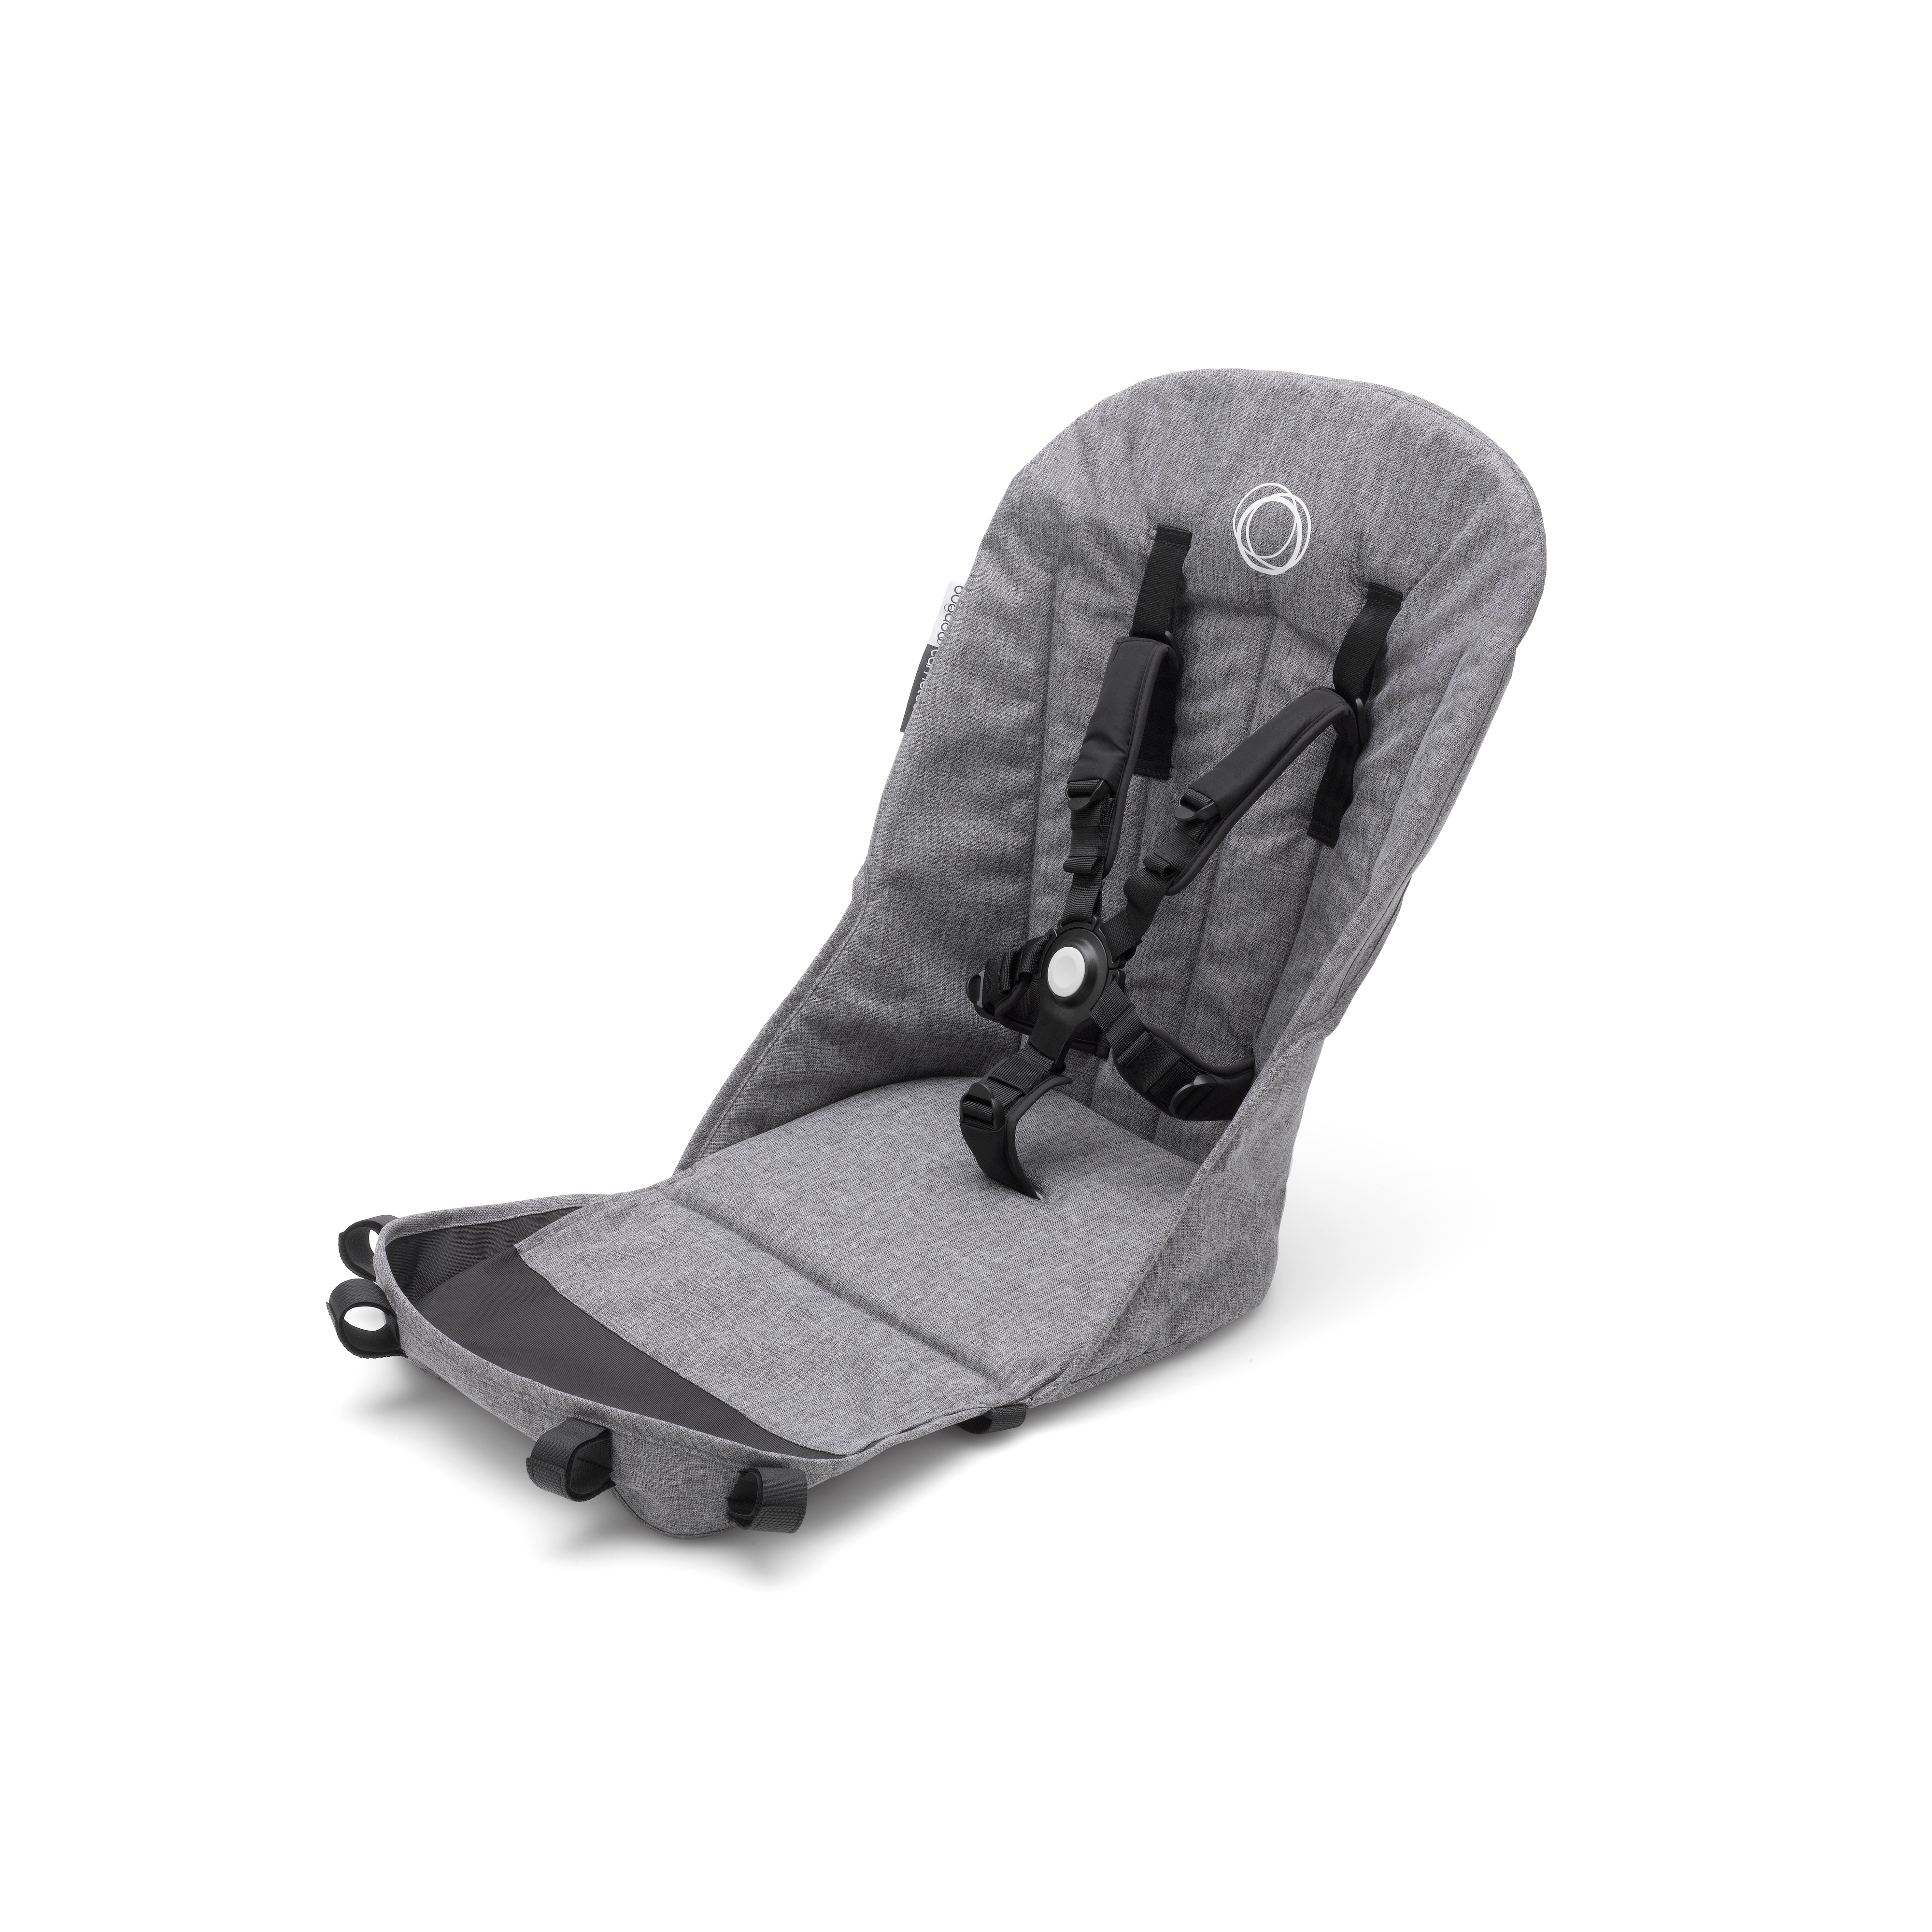 Bugaboo Trio Cameleon 3 Plus Stroller Grey Melange with Isofix Wingbase and  Turtle Air Car Seat Grey Melange - Adapters Included! unisex (bambini)